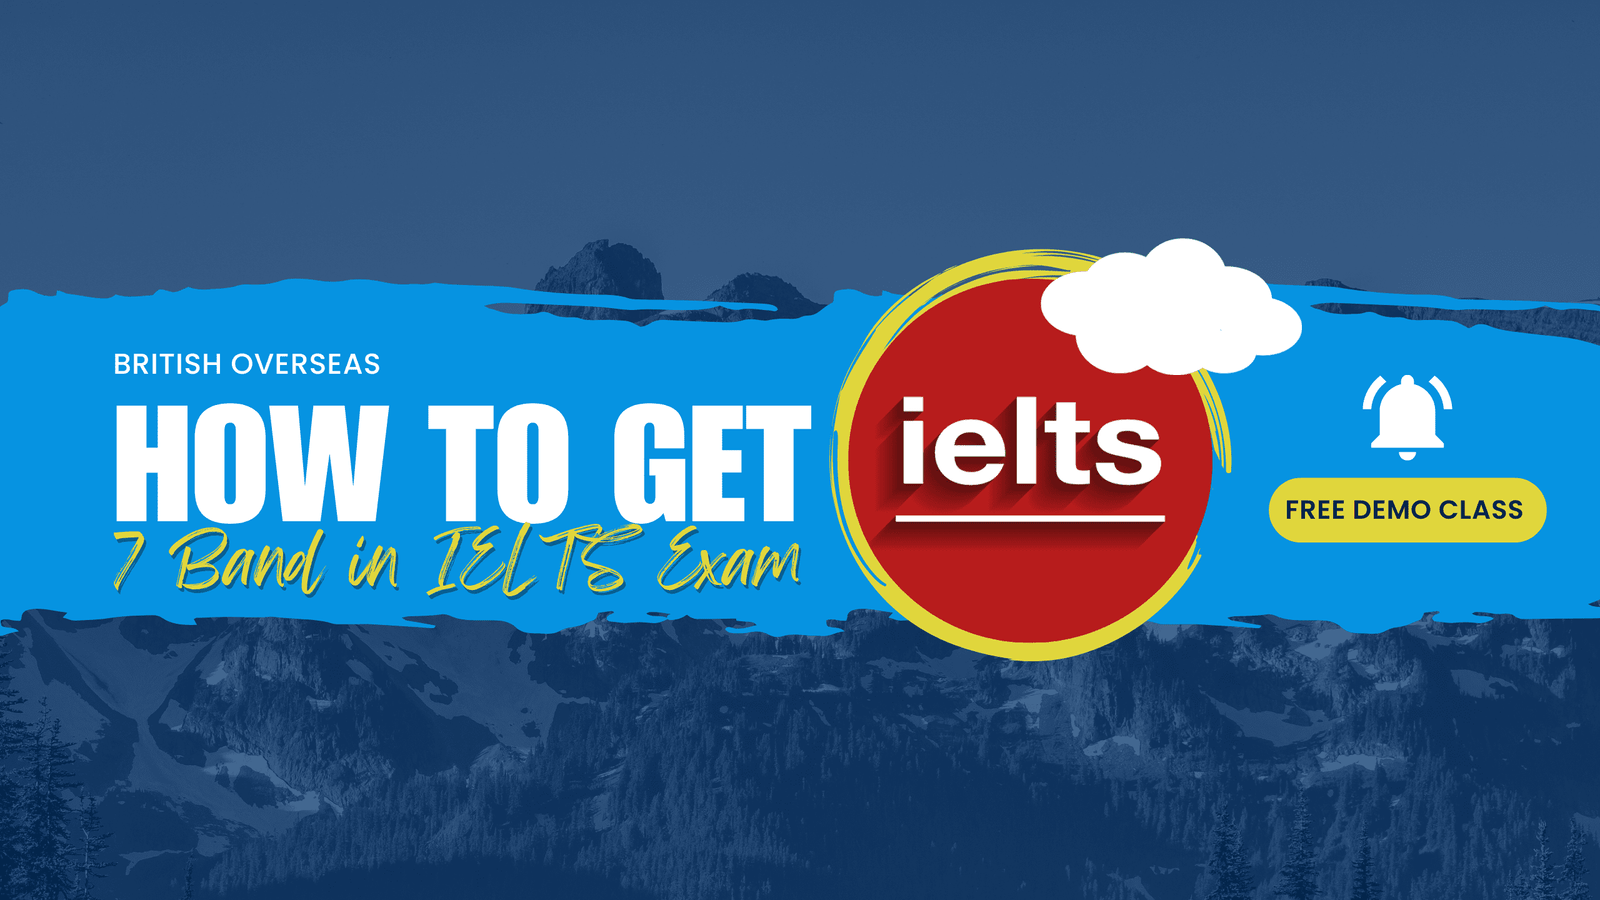 How to Get 7 Band in IELTS Exam